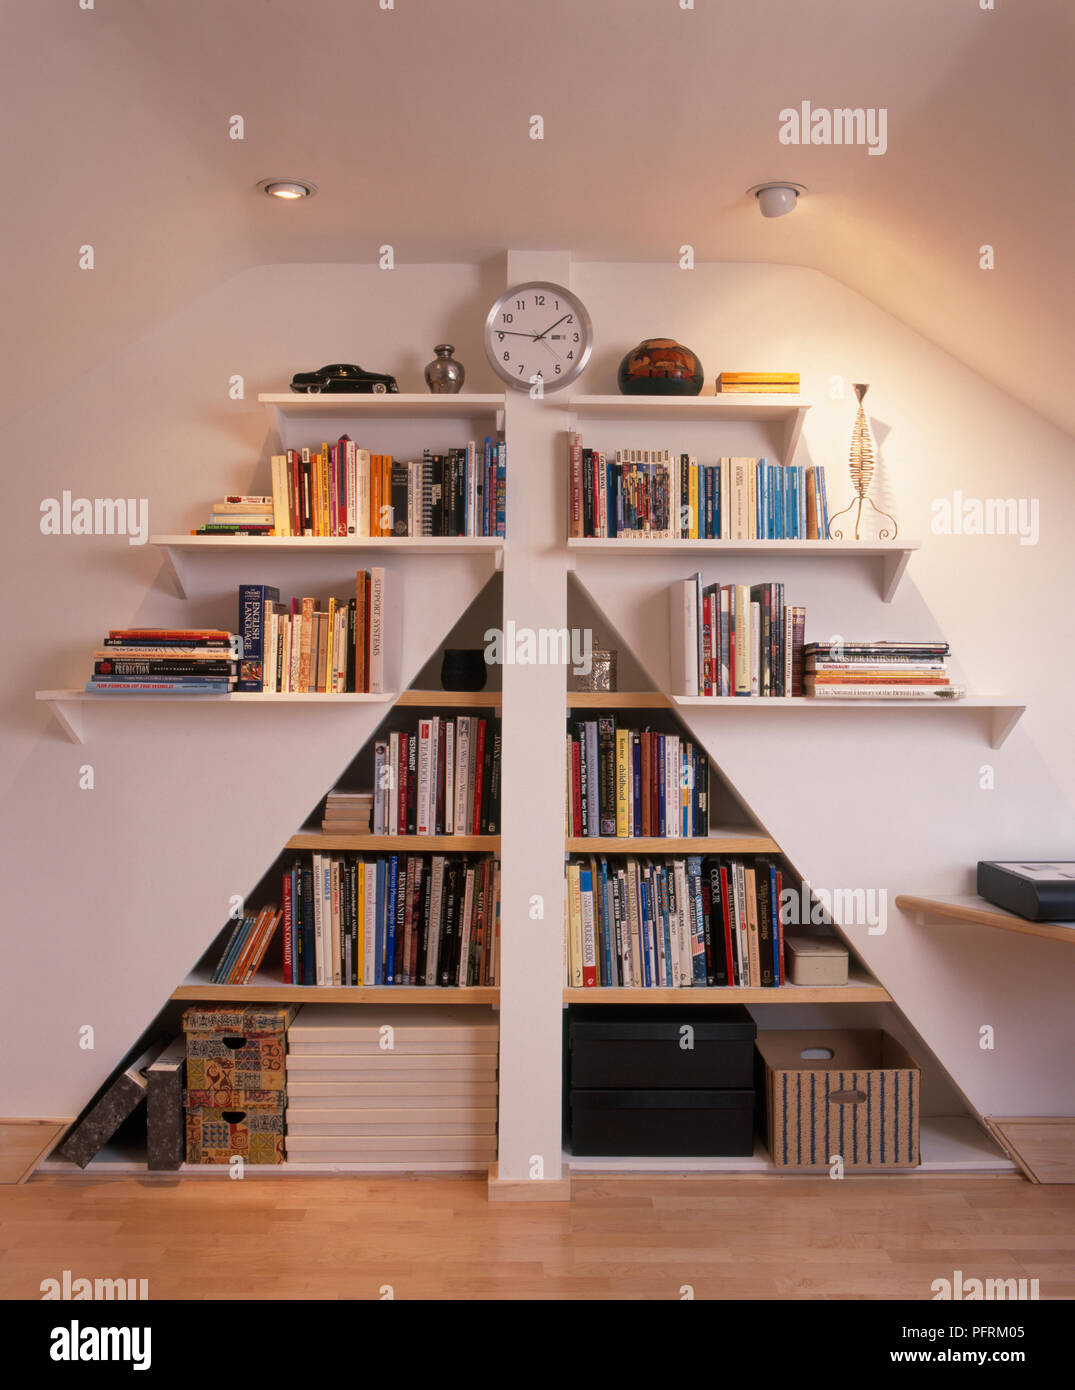 https://c8.alamy.com/comp/PFRM05/a-triangular-space-around-a-chimney-flue-with-shelves-full-of-books-and-boxes-PFRM05.jpg